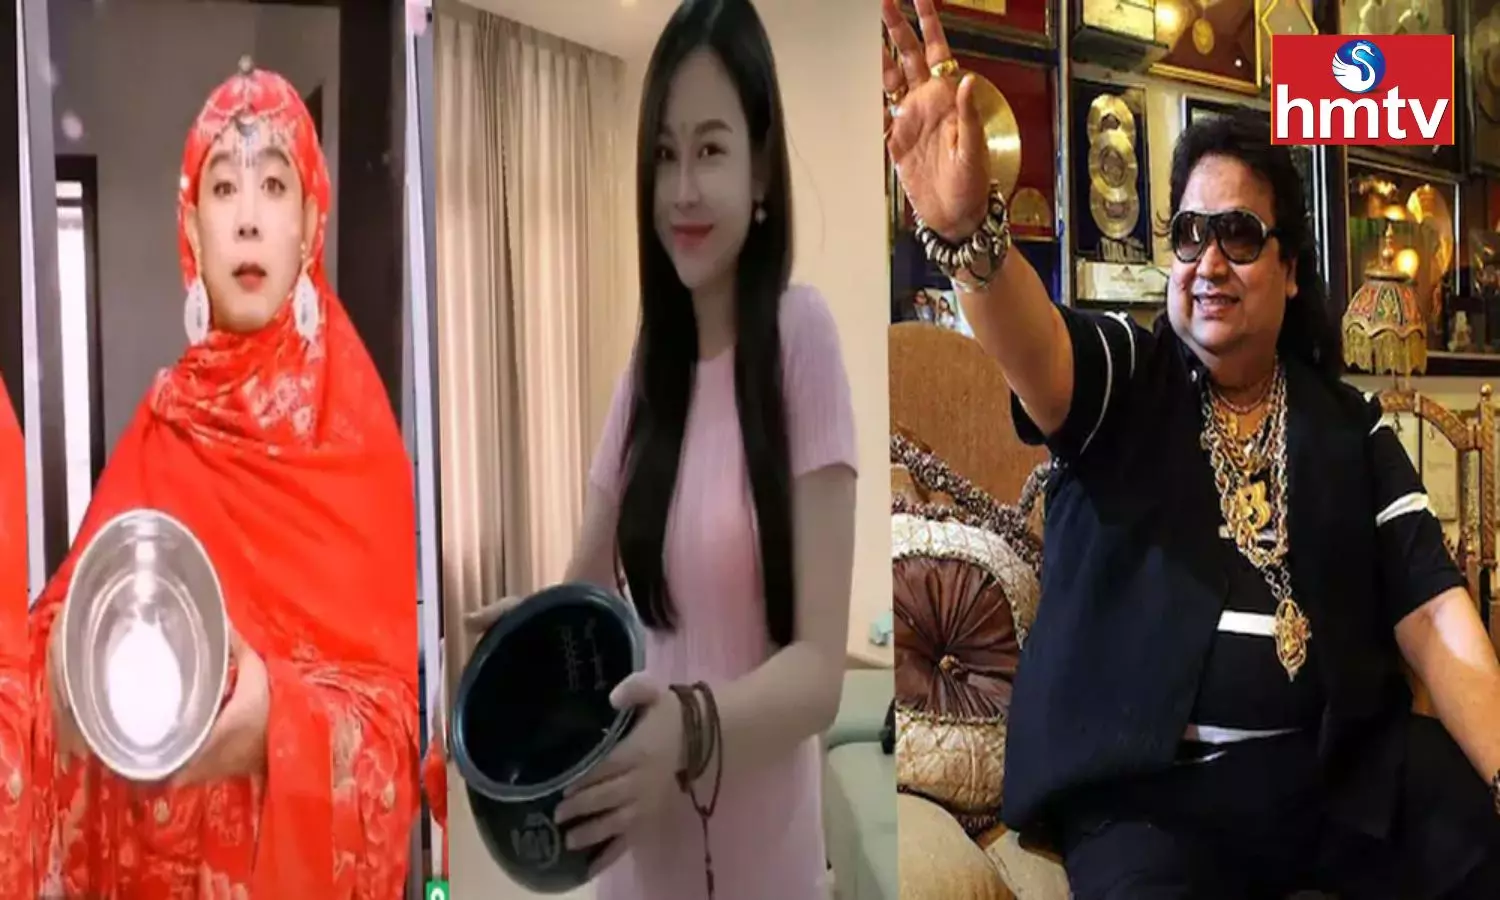 Bappi Lahiris Jimmy, Jimmy New Anthem In China To Protest Covid Lockdowns